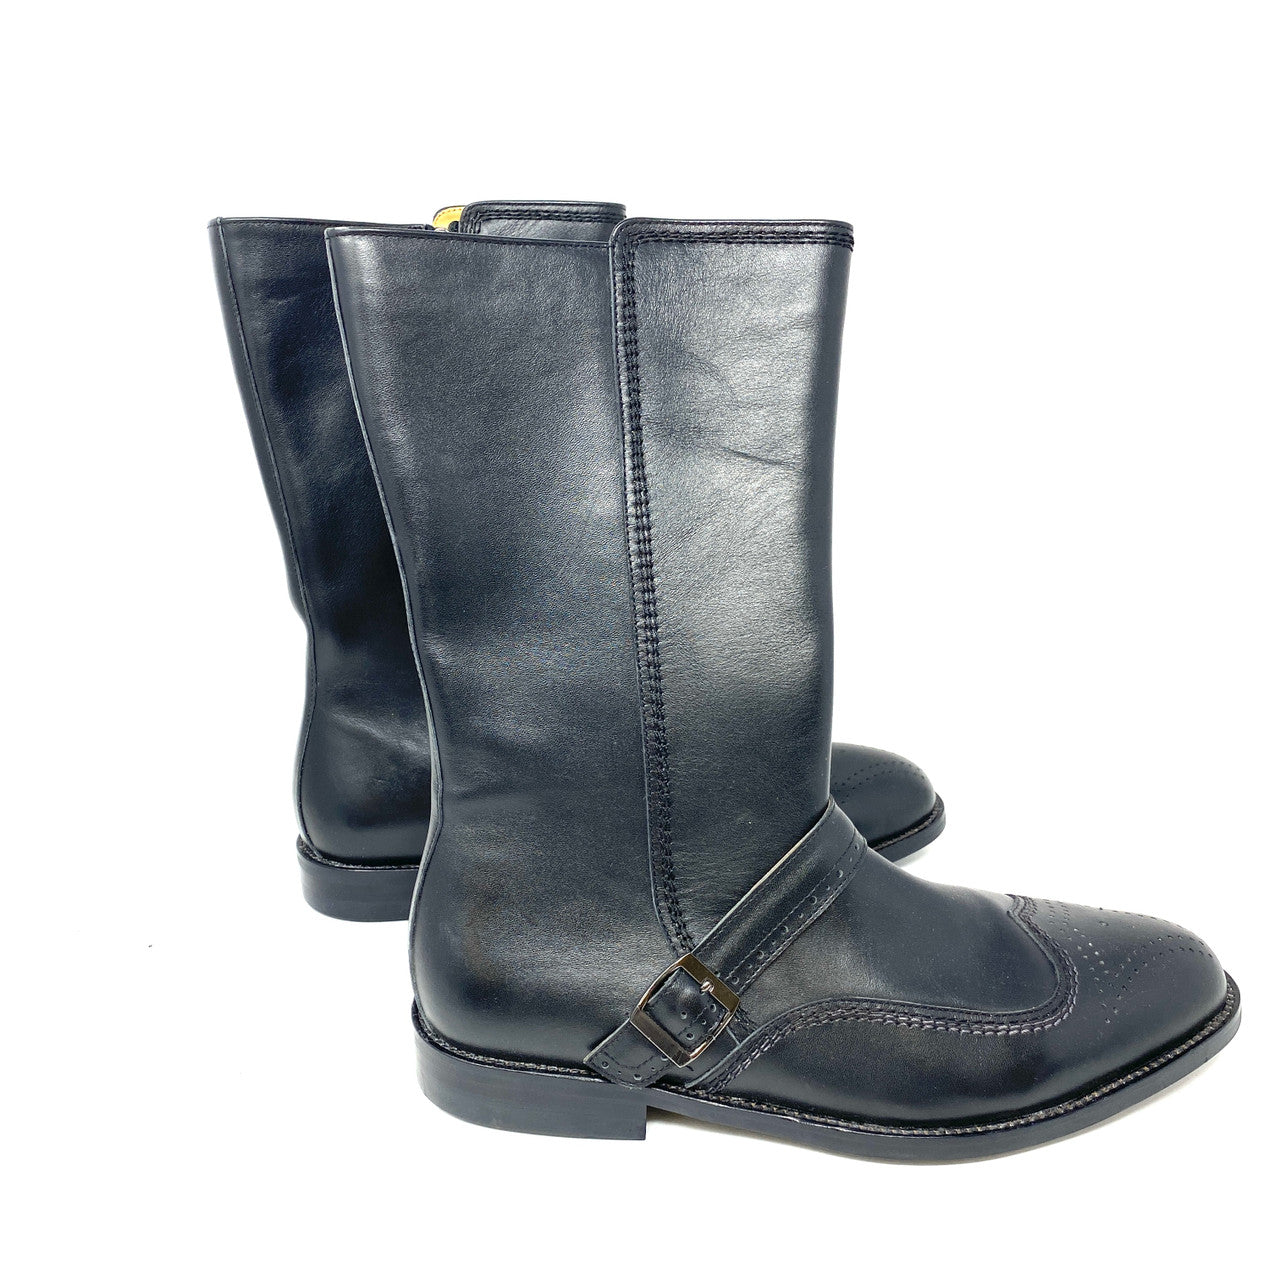 Awl and Sundry Black Tall Brogued Boots-Side